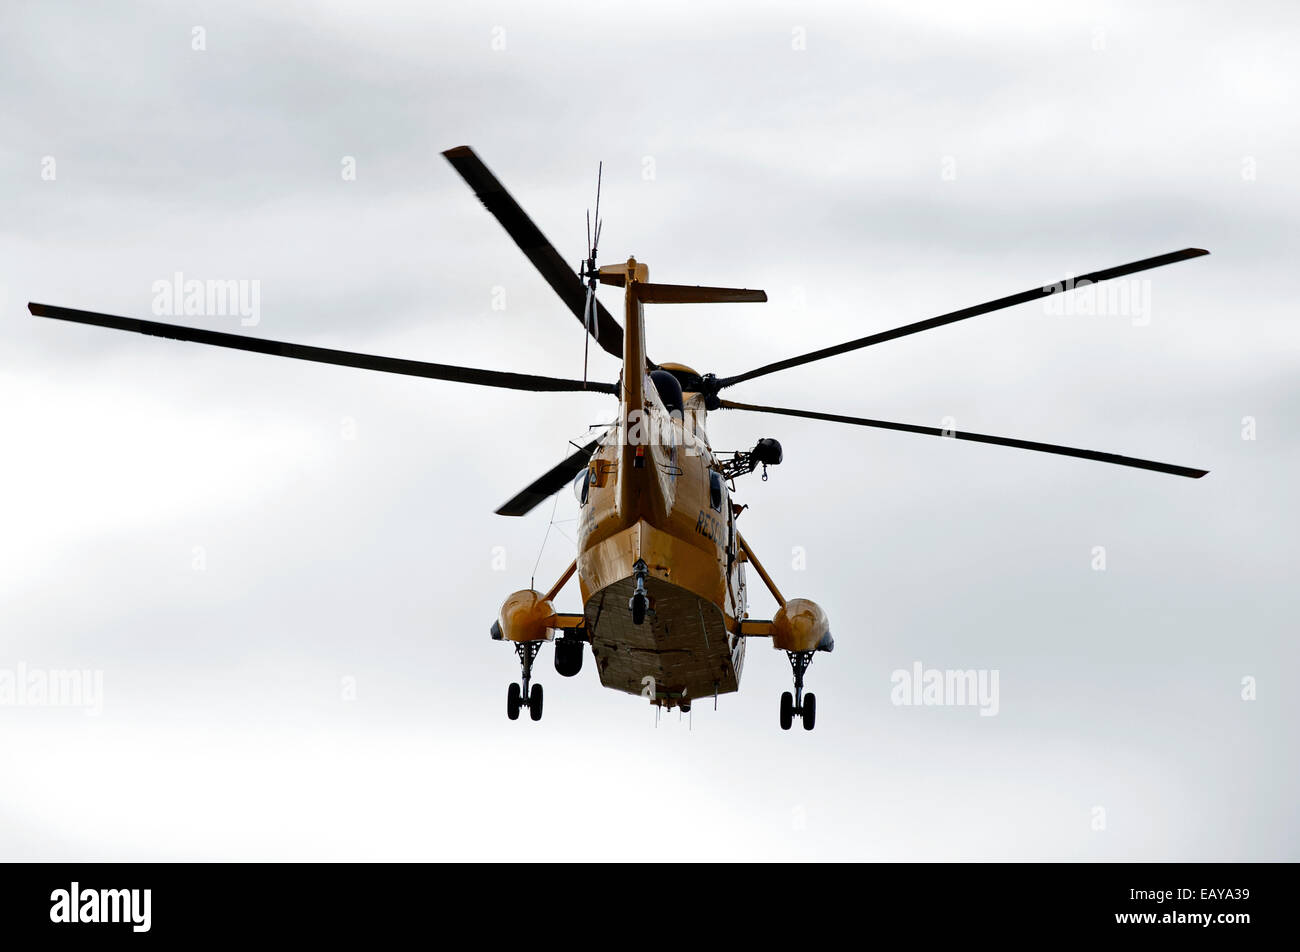 RAF Westland SAR Seaking HAR3 Helicopter from 202Sqn based at Lossiemouth, Morayshire. Scotland. Stock Photo